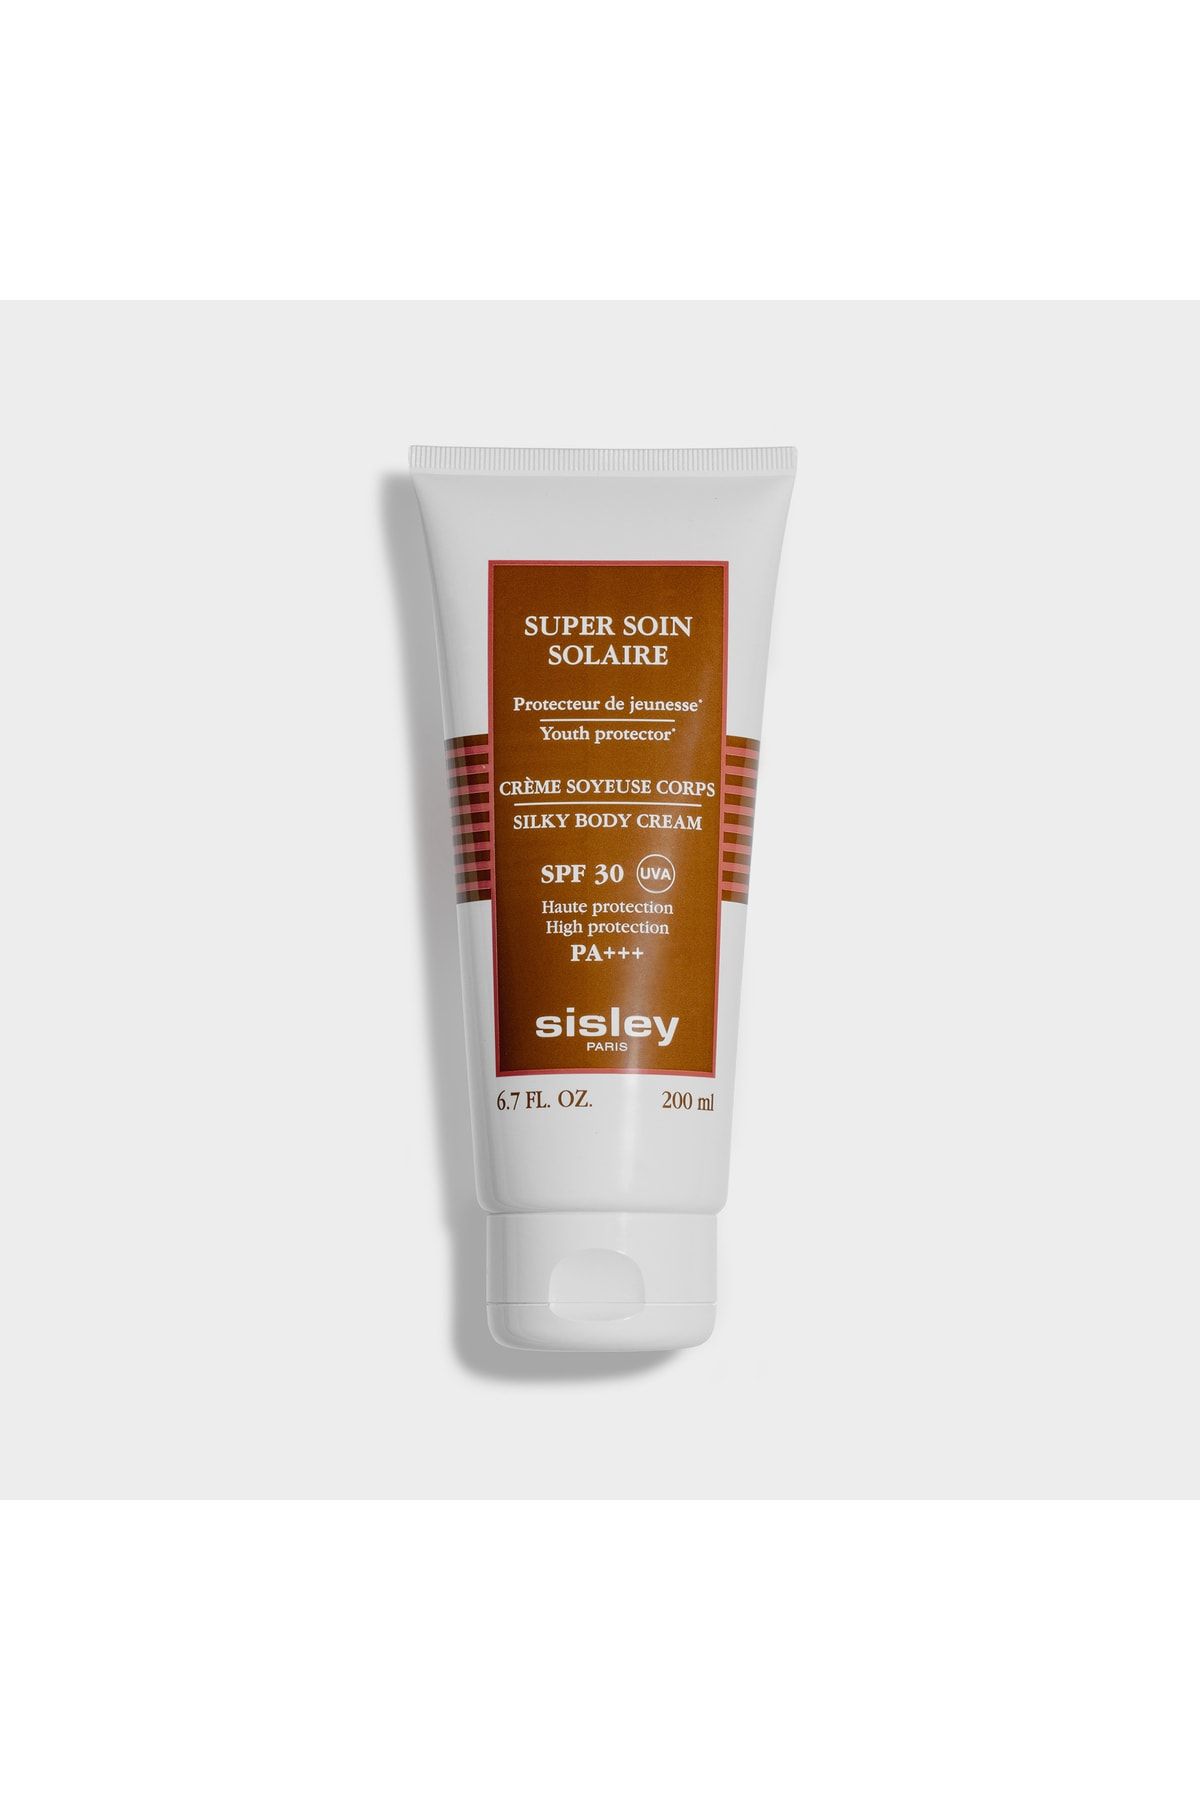 Sisley Super Soin Solaire Creme Soyeuse Corps Spf30